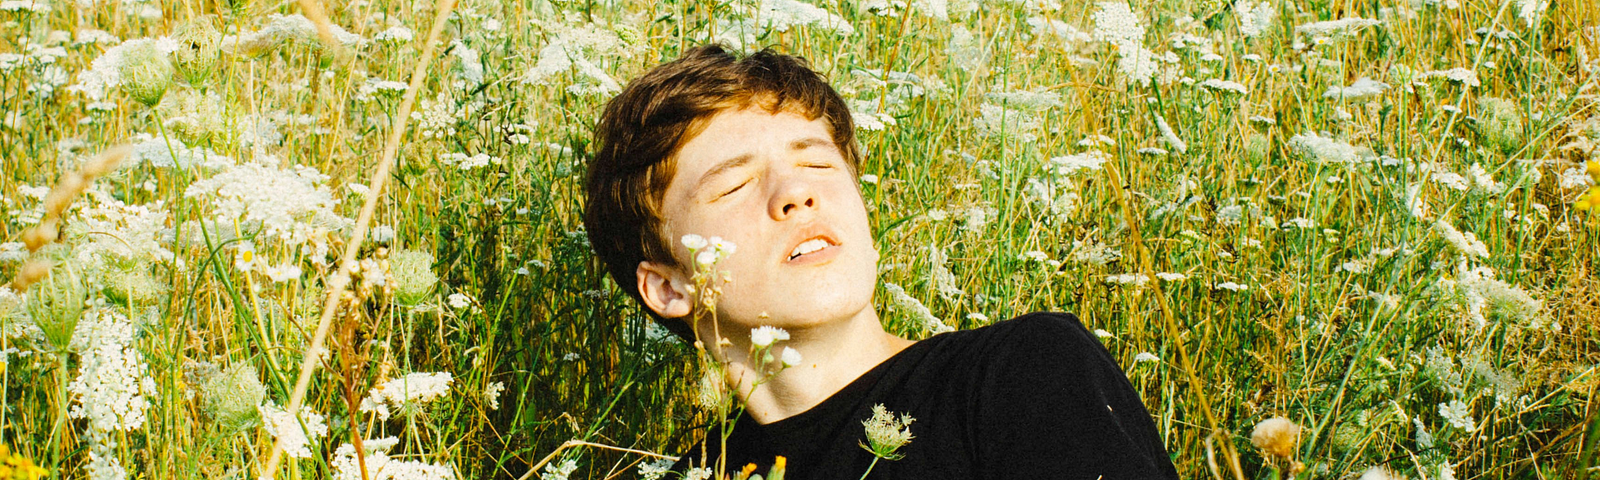 A young white man with short, slightly-ginger hair, wearing a black T-shirt and sitting and leaning back on his right arm in a field of tall green and amber grass and while flowers. It’s a sunny day, his eyes and closed and his face is turned towards the sun.